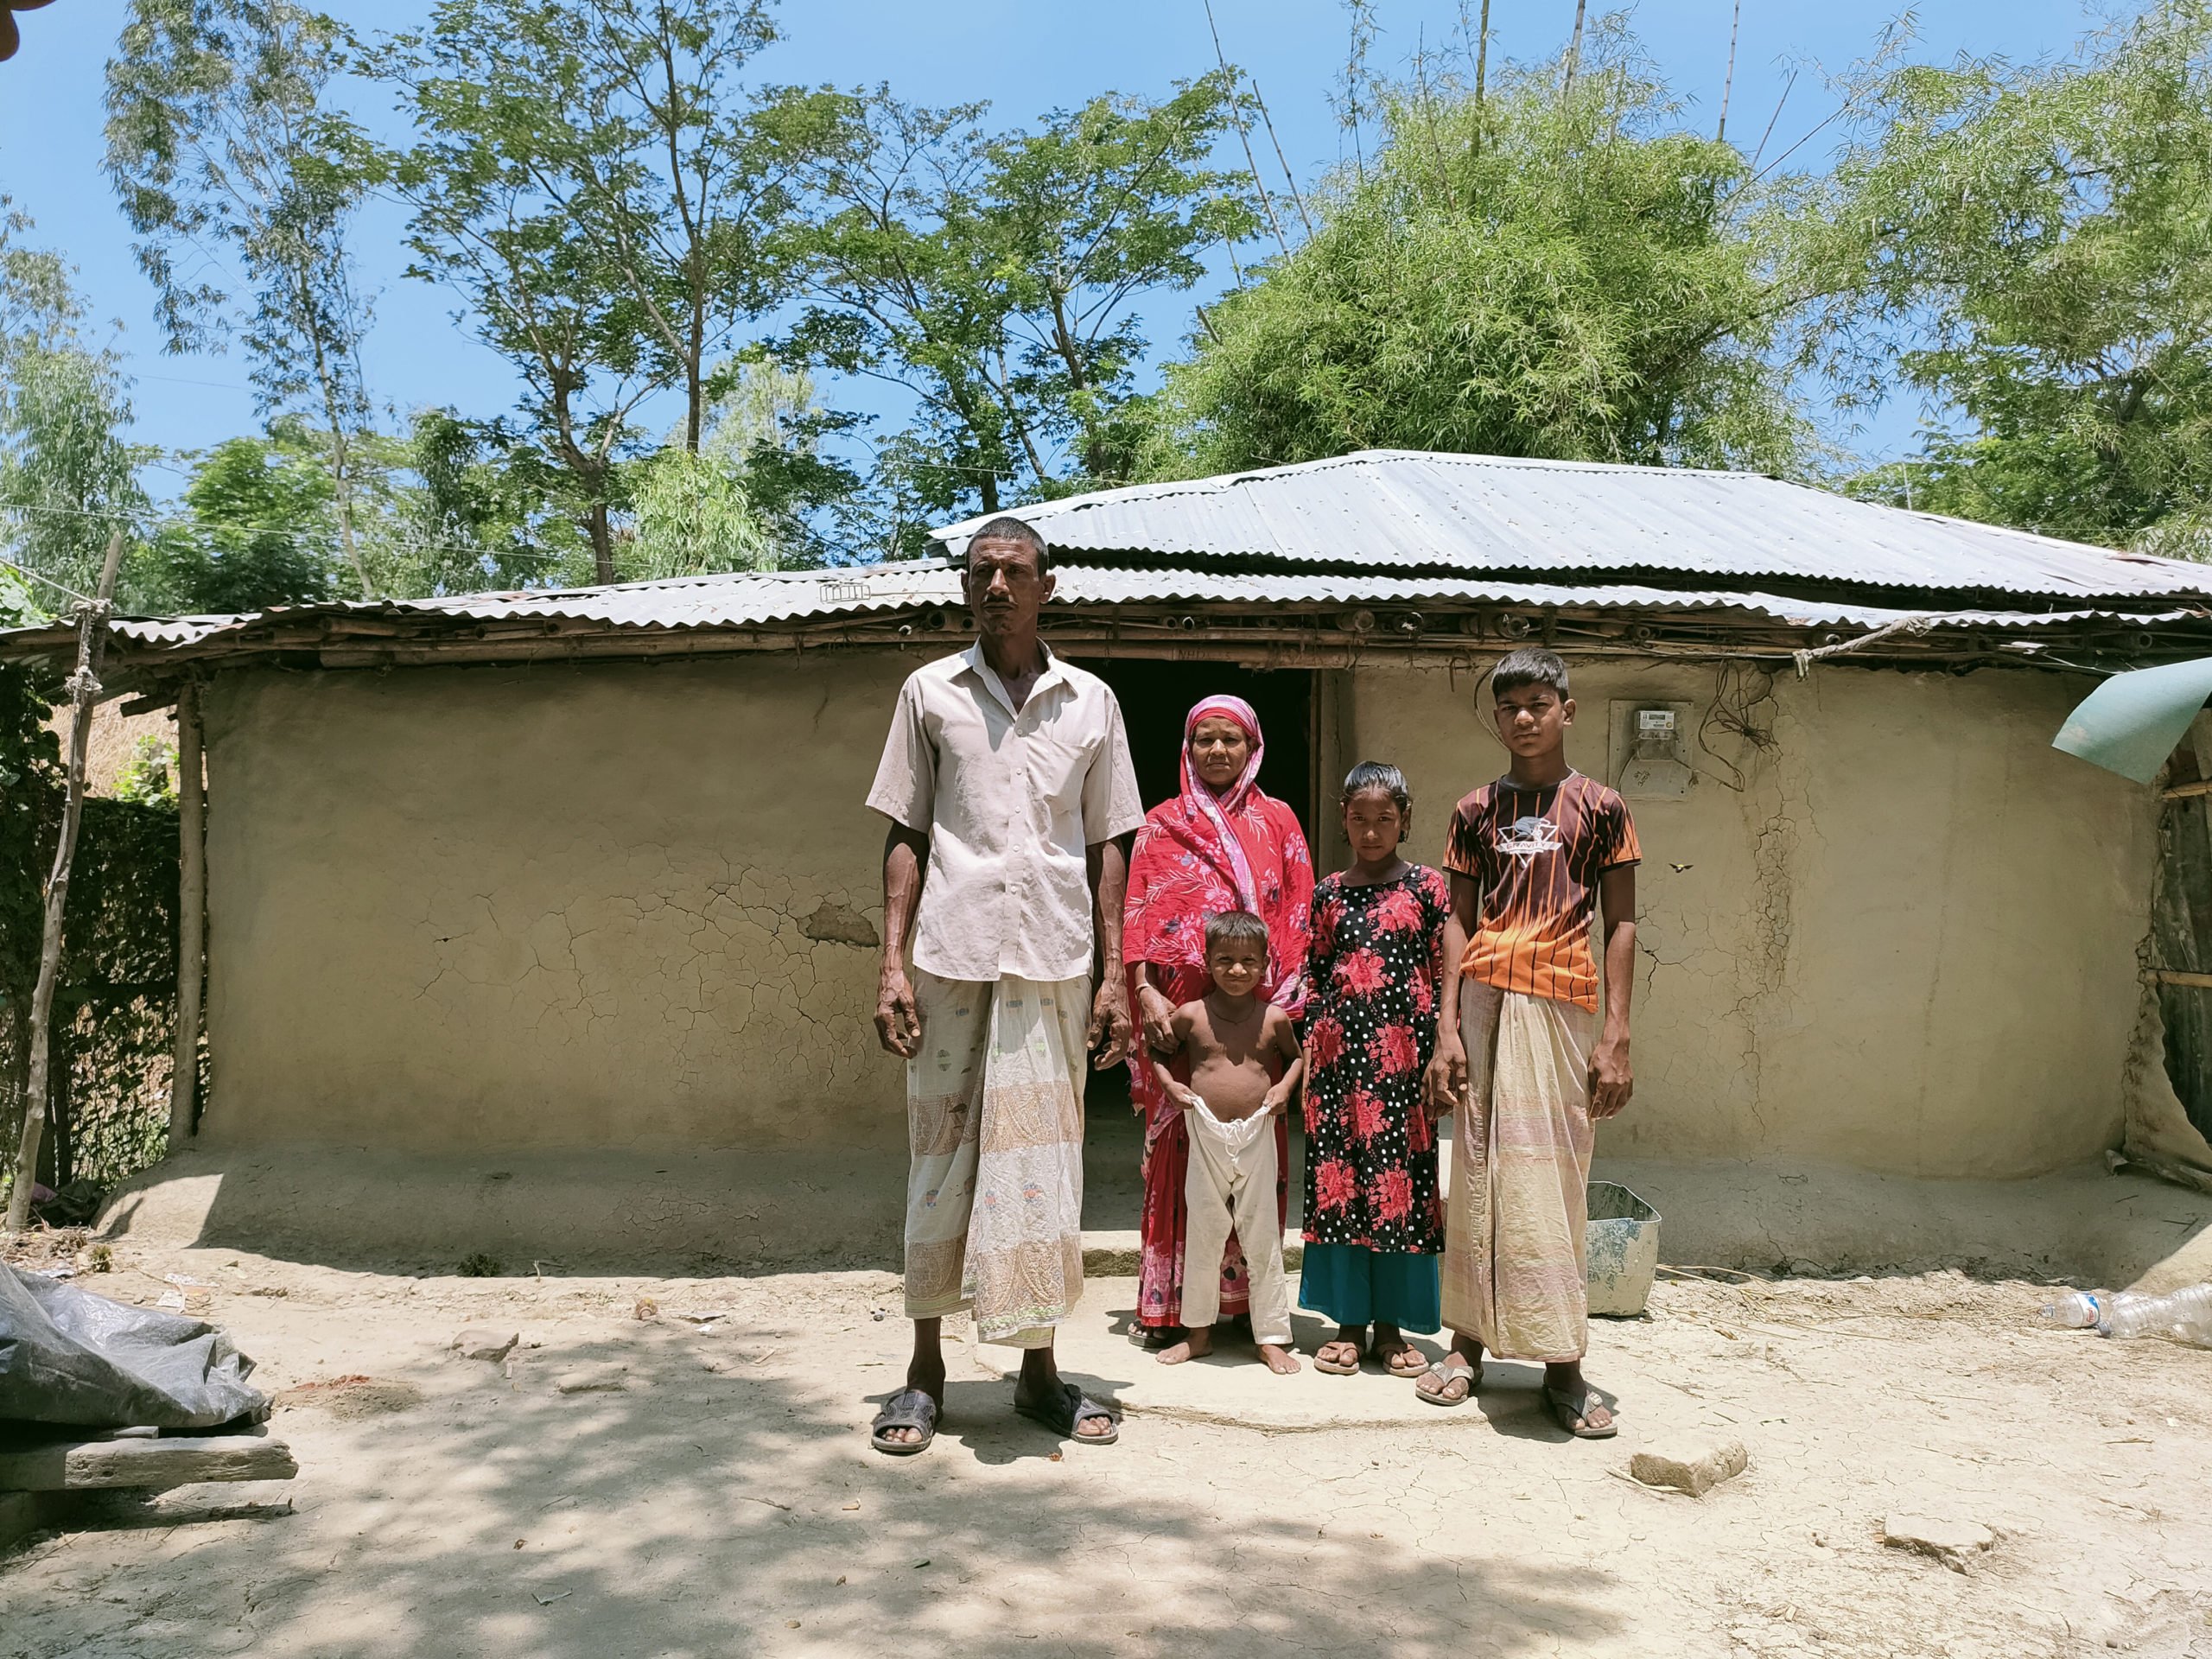 Nurul Kabir and his family. Kabir says he did not sell his land to the power plant authorities, and that it has been sold fraudulently. (Image: Shamsuddin Illius)